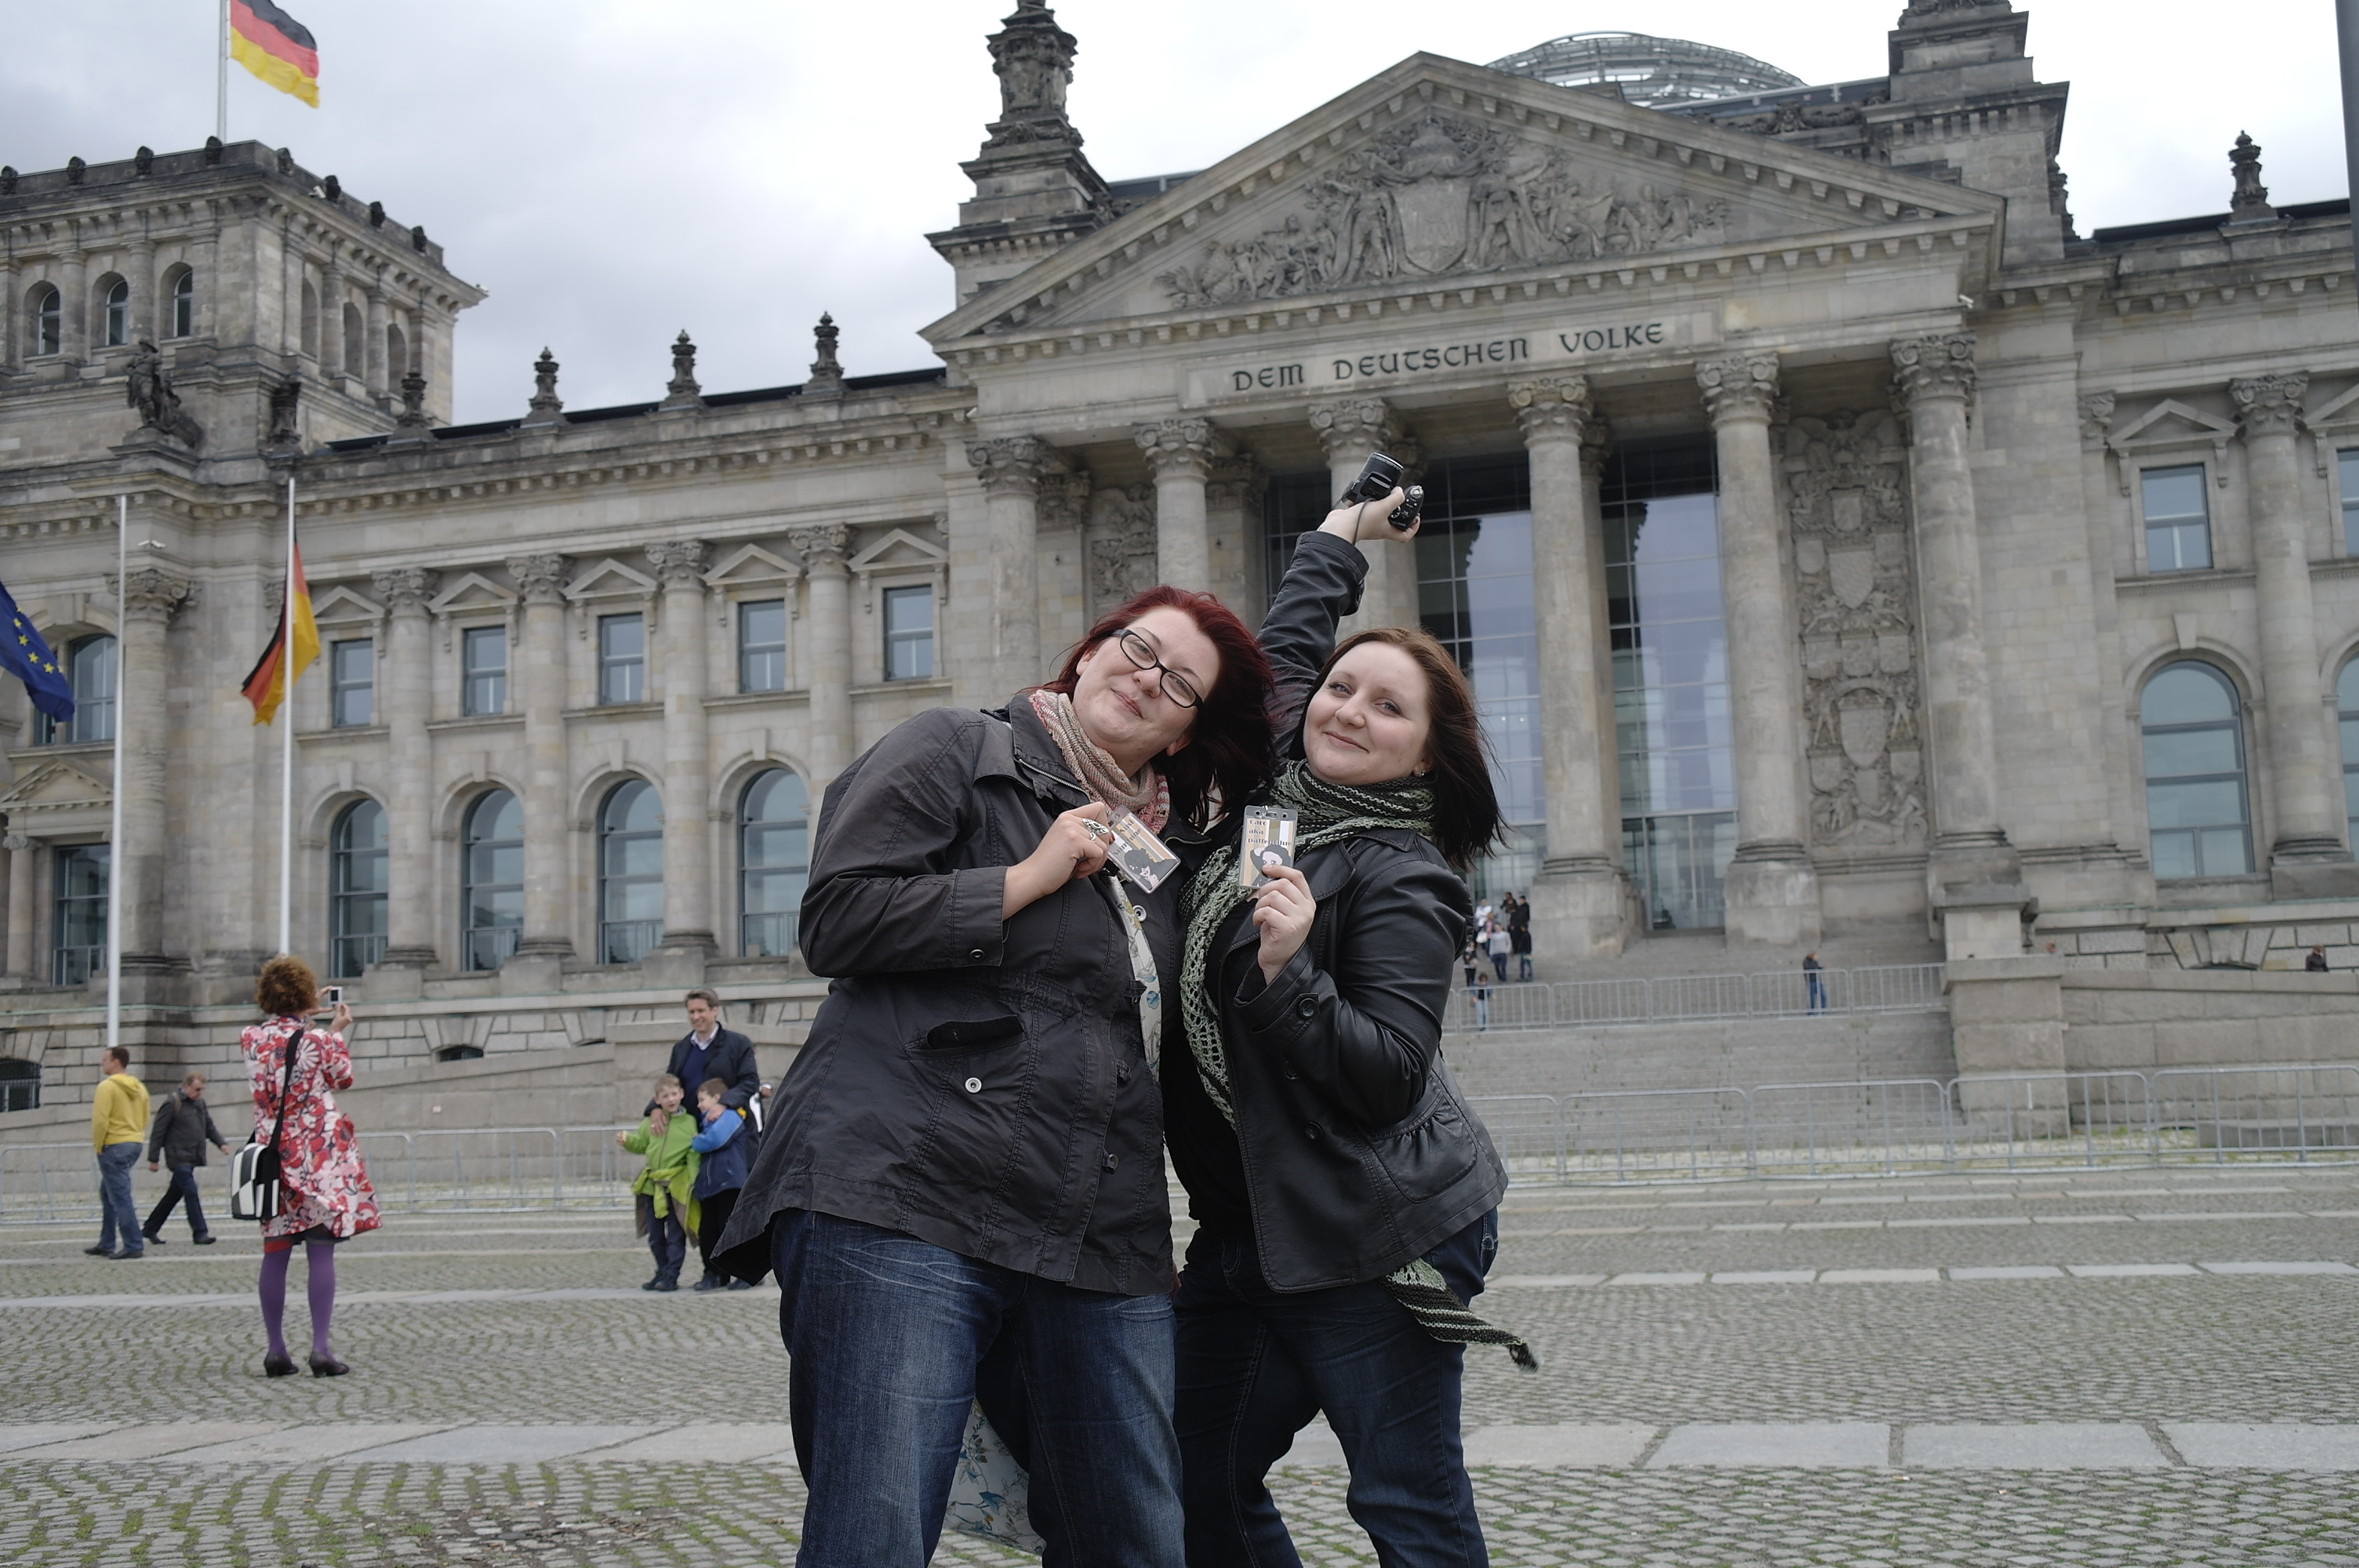 Post Thumbnail of Love Letter Convention - Caro' & Susi's adventures in Berlin